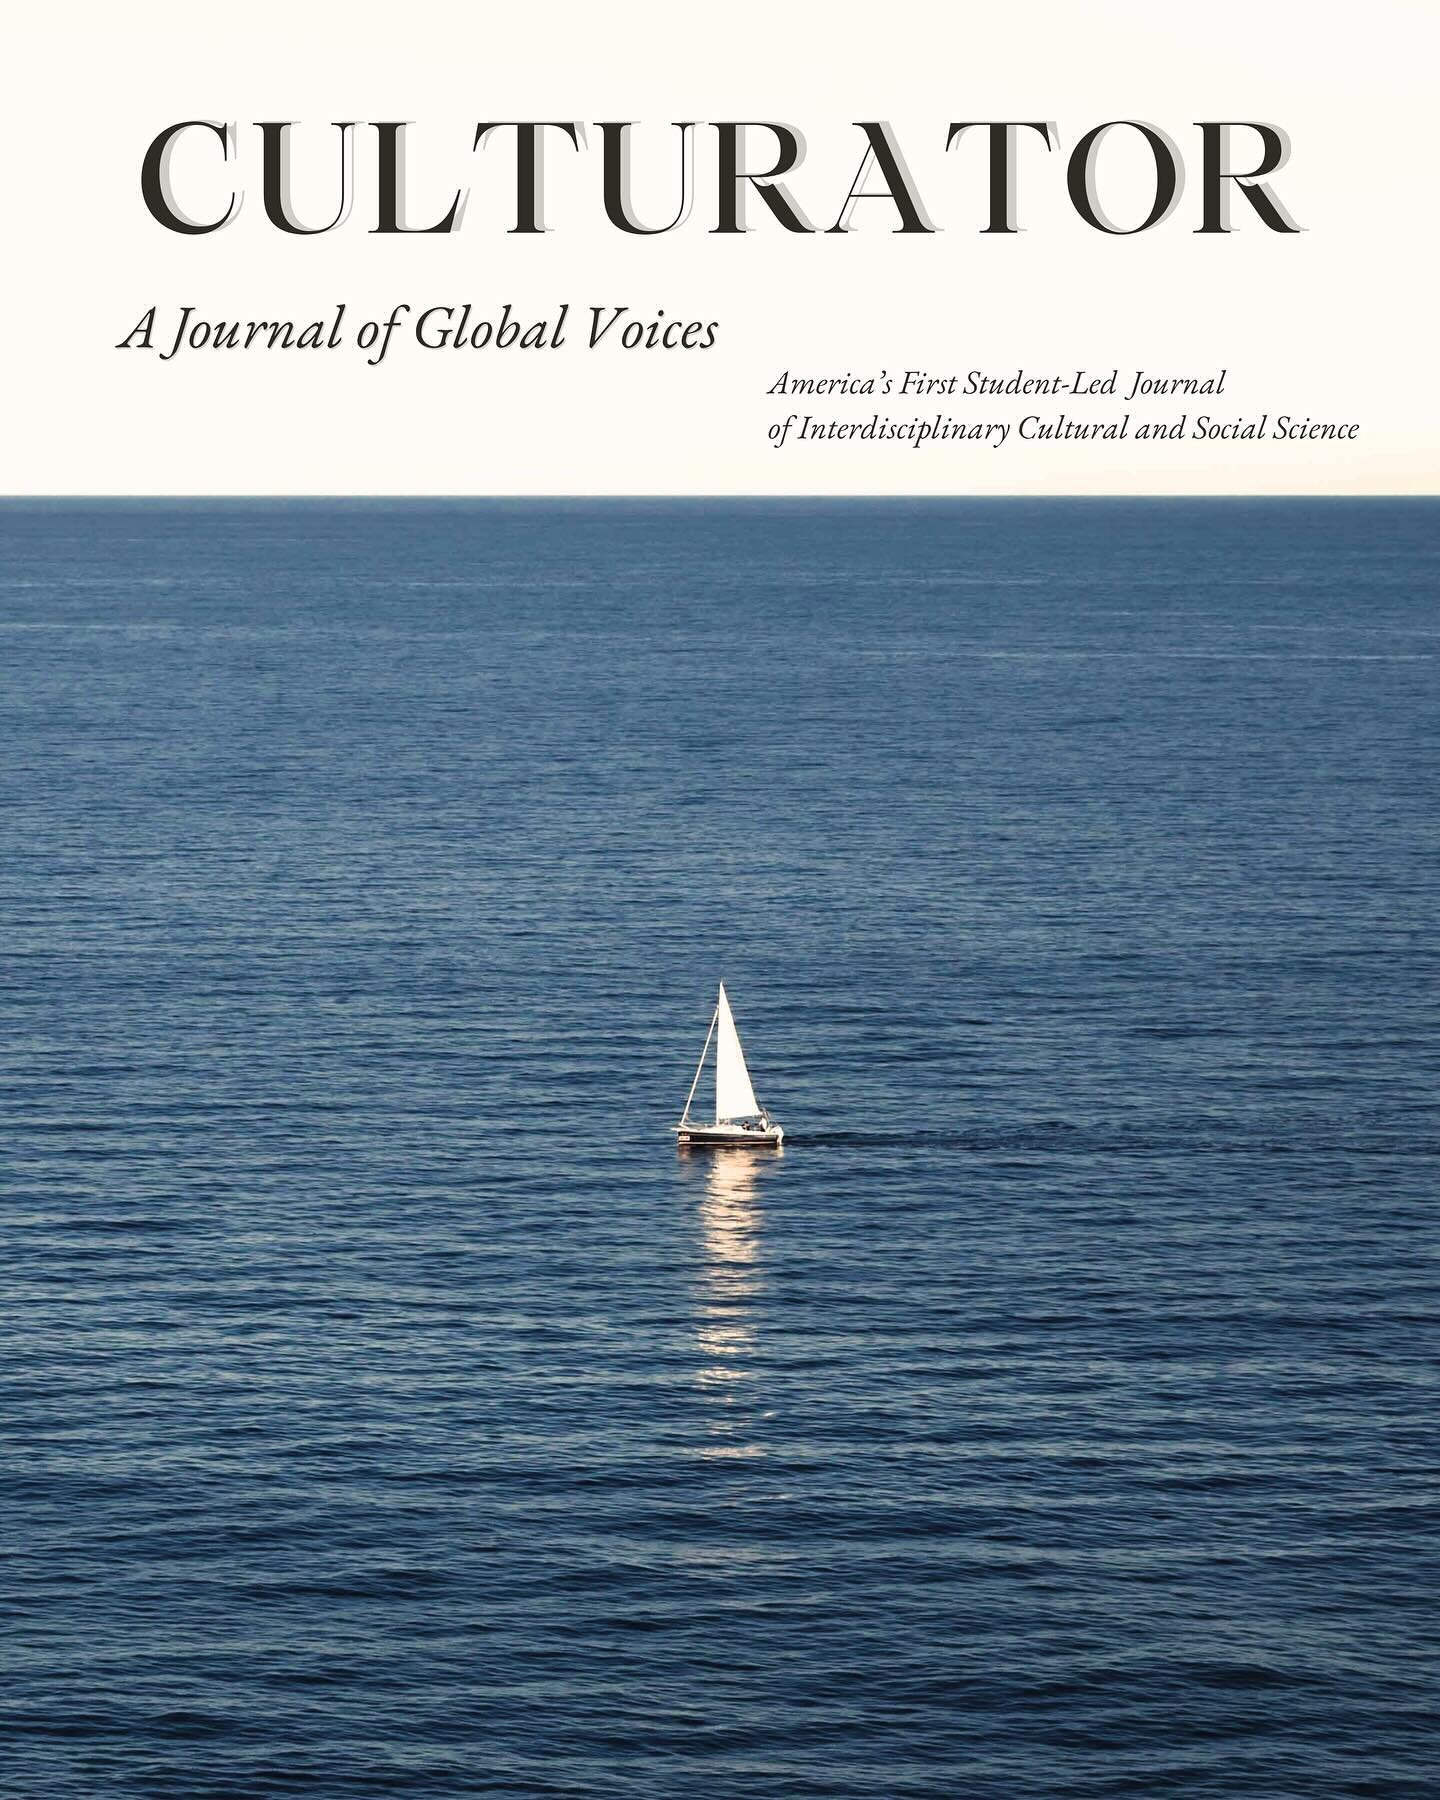 ⭐️ We are so thrilled to announce the first issue of Culturator: A Journal of Global Voice this January, featuring authors @victoria.ma__, @maggir_zhang, and @yasminls_06. We want to thank the hard work of all our staff members these past months in m